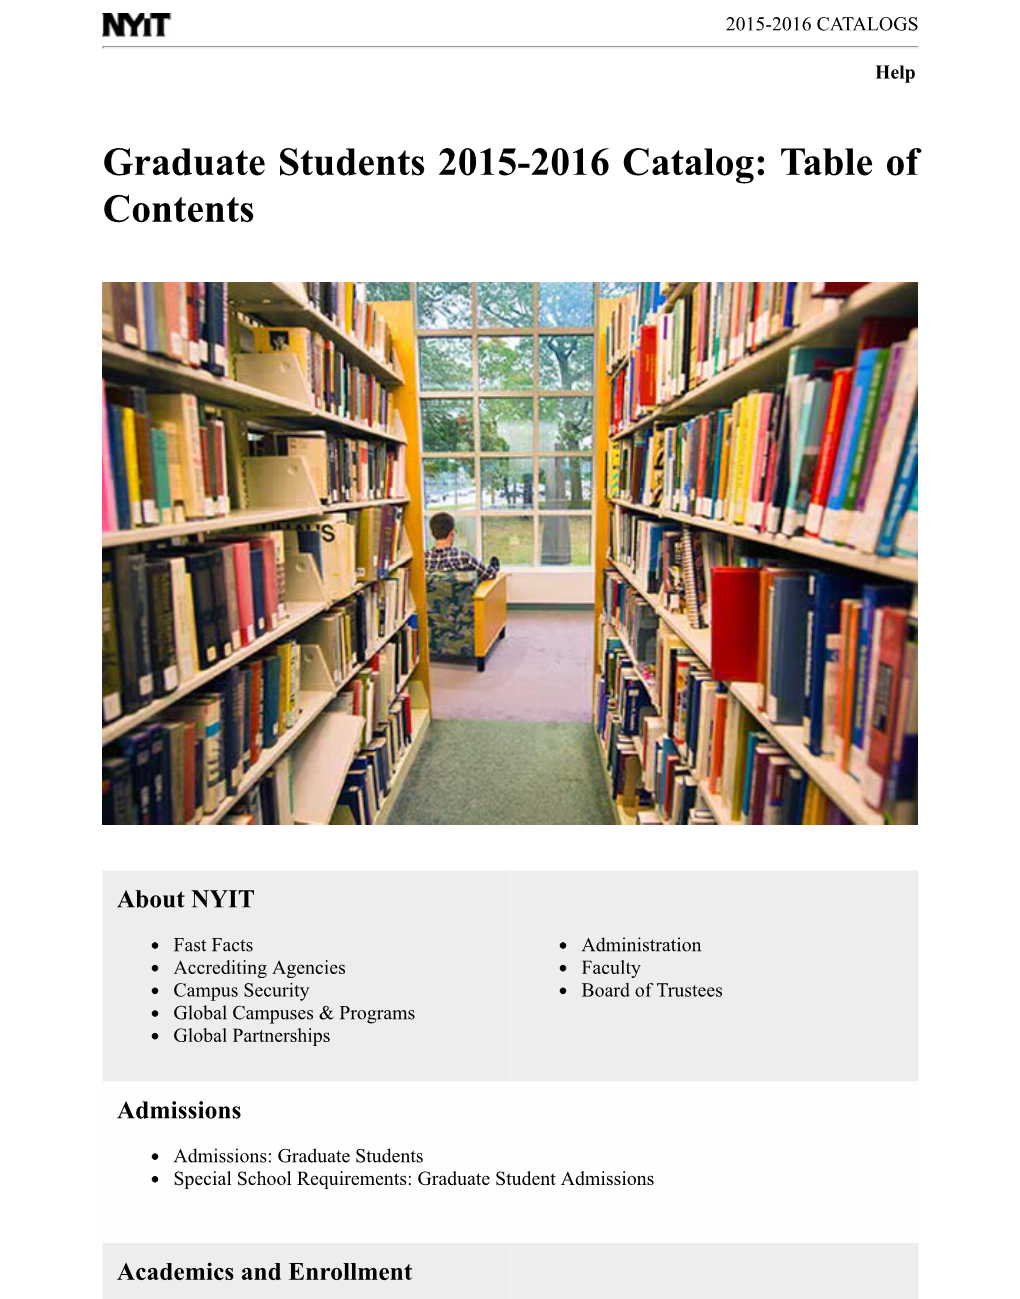 Graduate Students 2015-2016 Catalog: Table of Contents